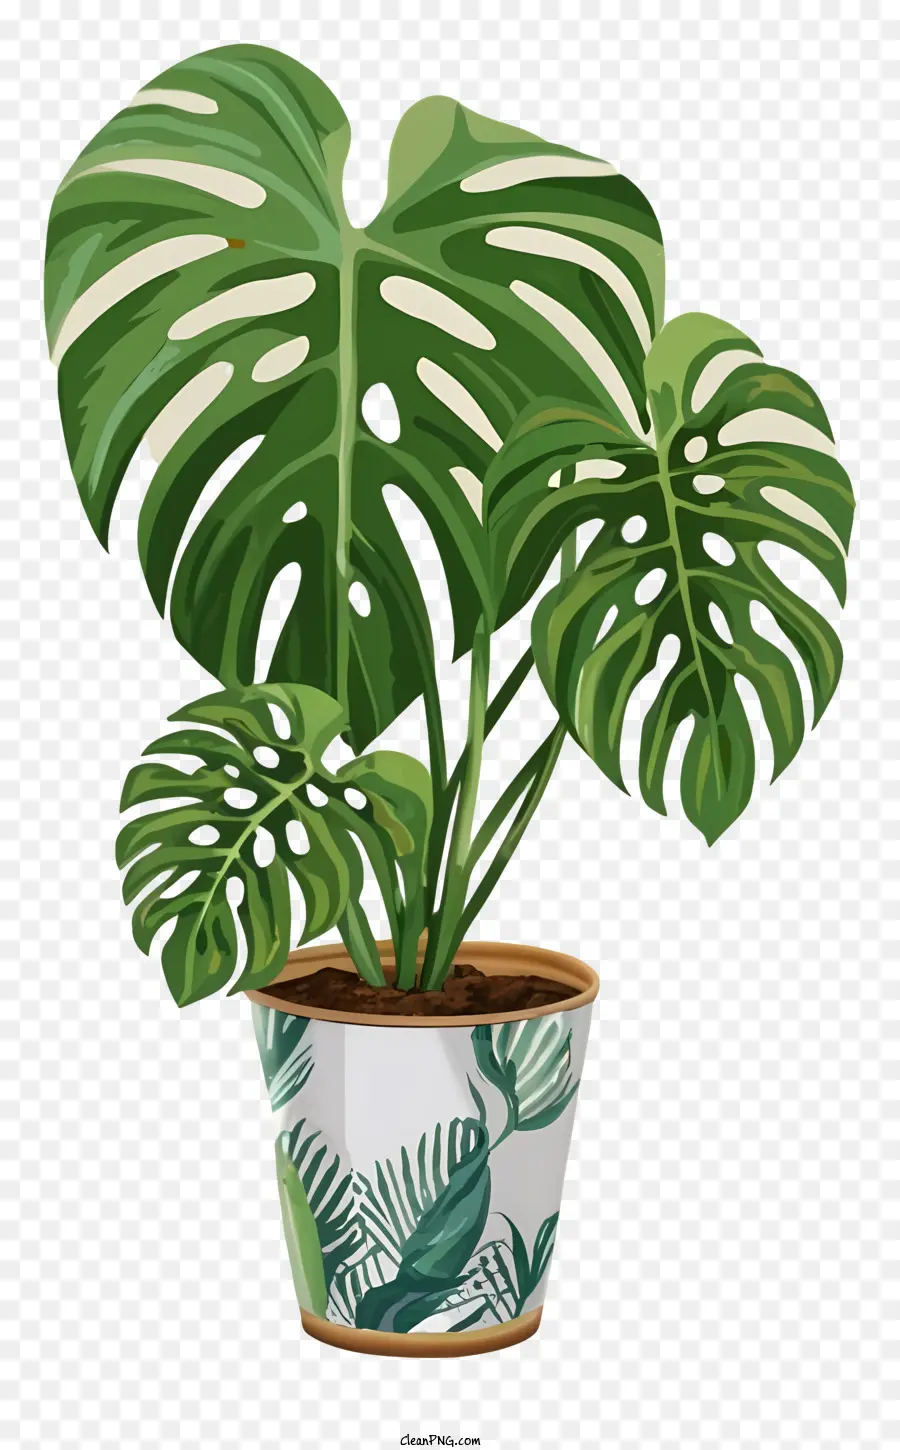 potted monster plant dark green leaves green stems white pot black accents